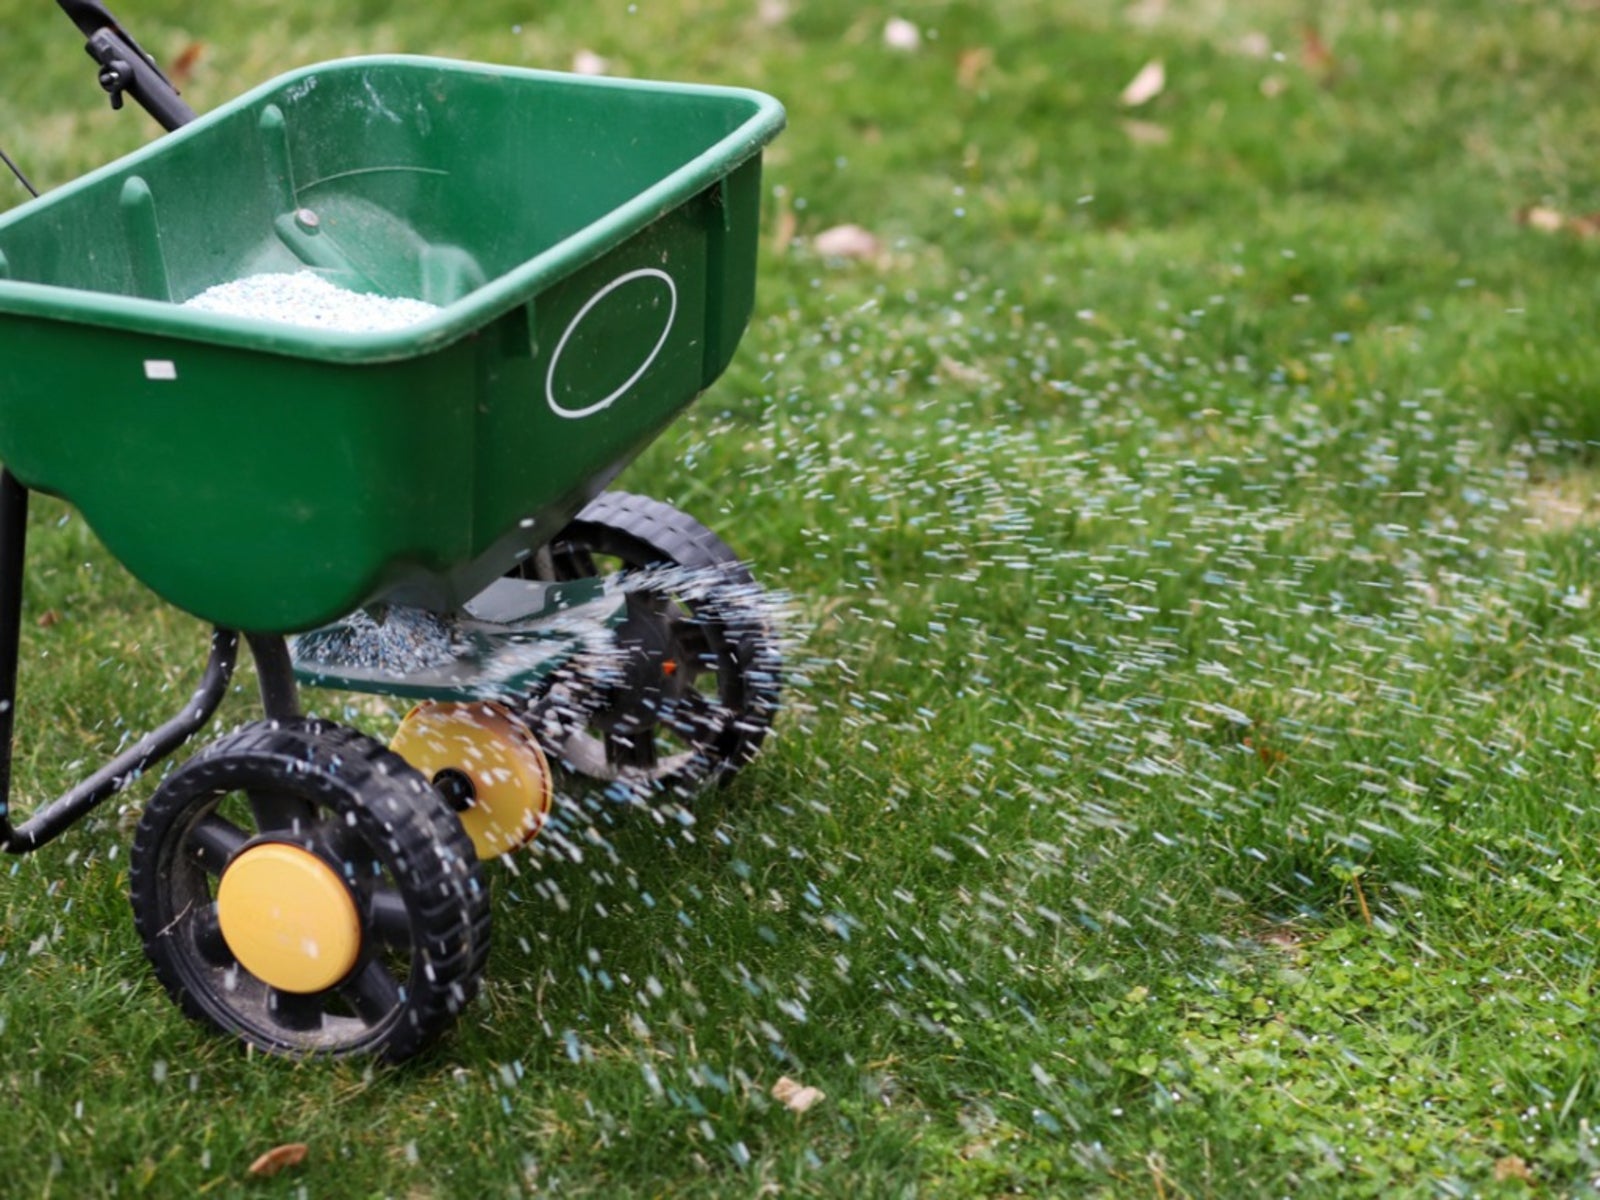 Tips On Feeding Lawns - How And When To Put Fertilizer On Lawn